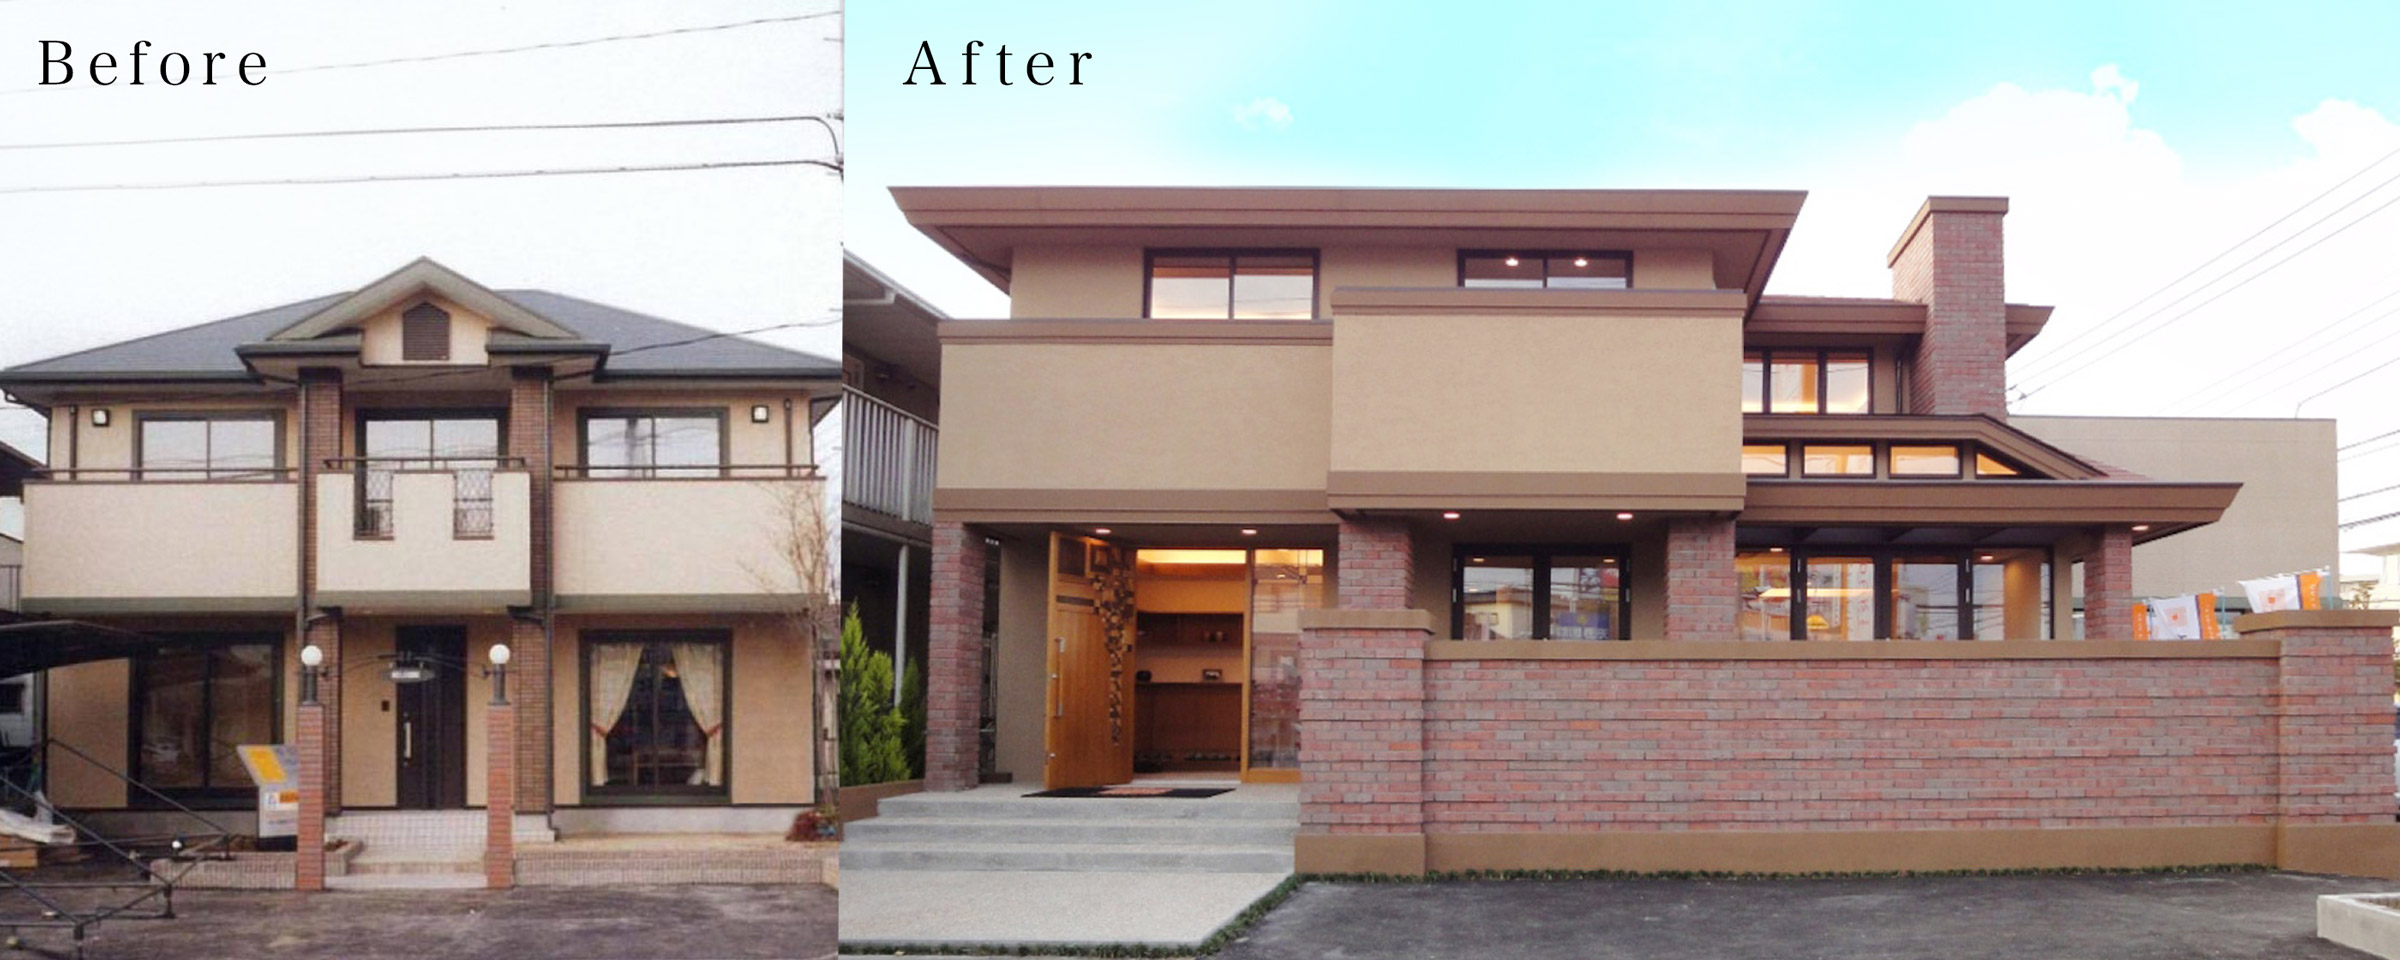 House:Before,After